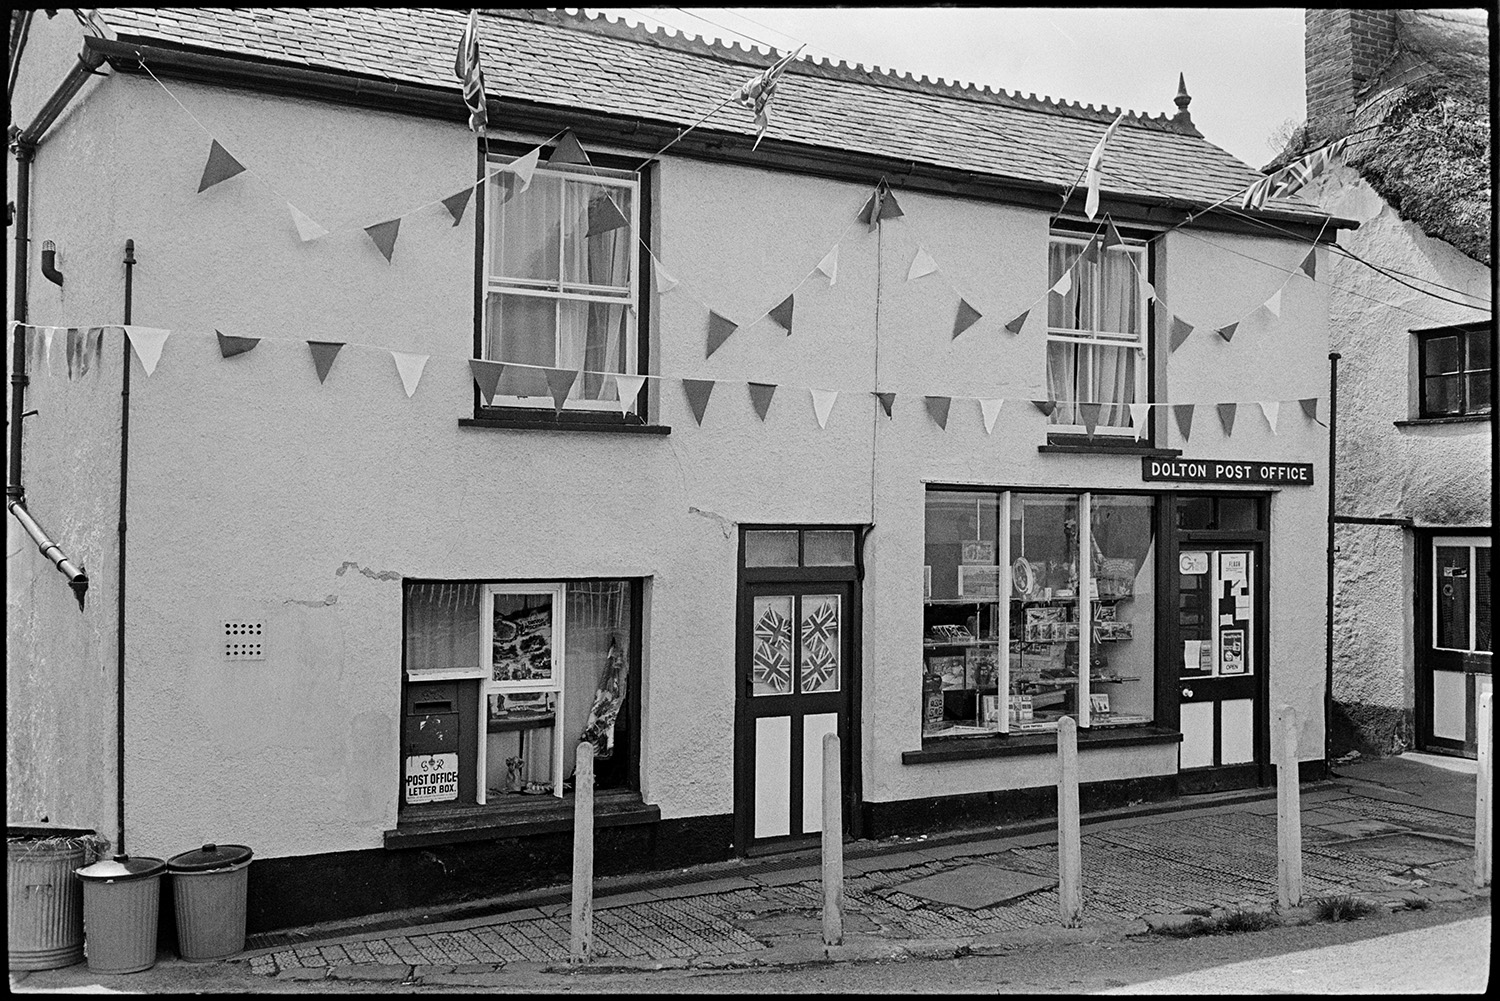 Front of Post Office with flags for Jubilee. 
[The front of Dolton Post Office in Fore Street, Dolton. The building is decorated with Union Jack flags and bunting to celebrate the Silver Jubilee of Queen Elizabeth II.]